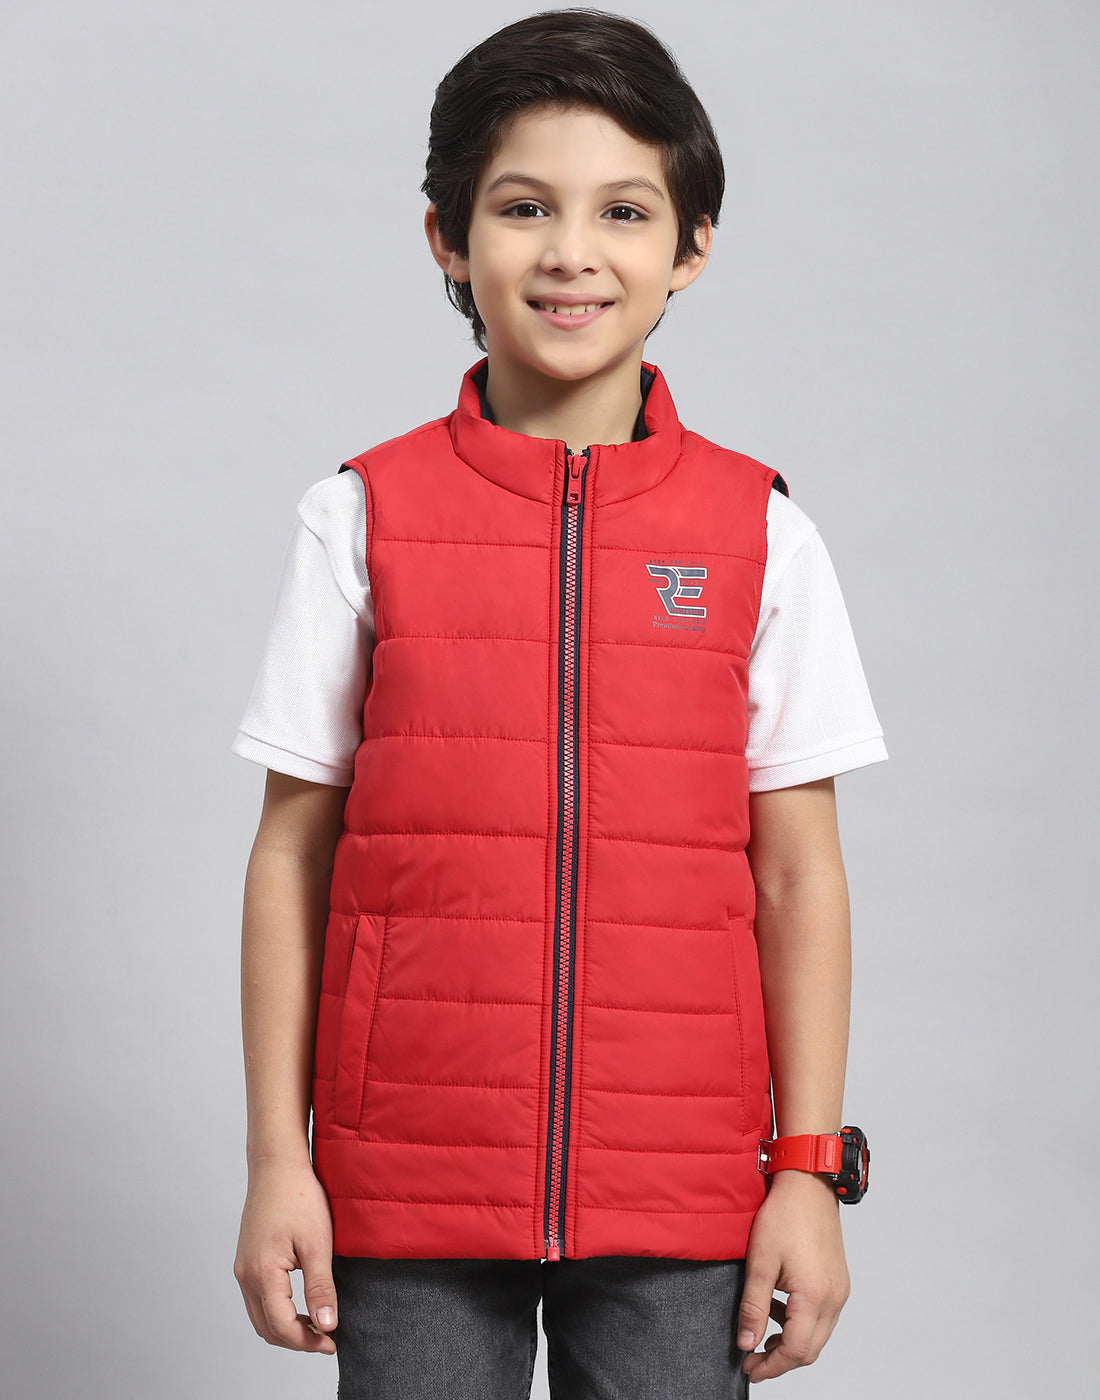 Boys Red Solid Stand Collar Sleeveless Boys Jacket